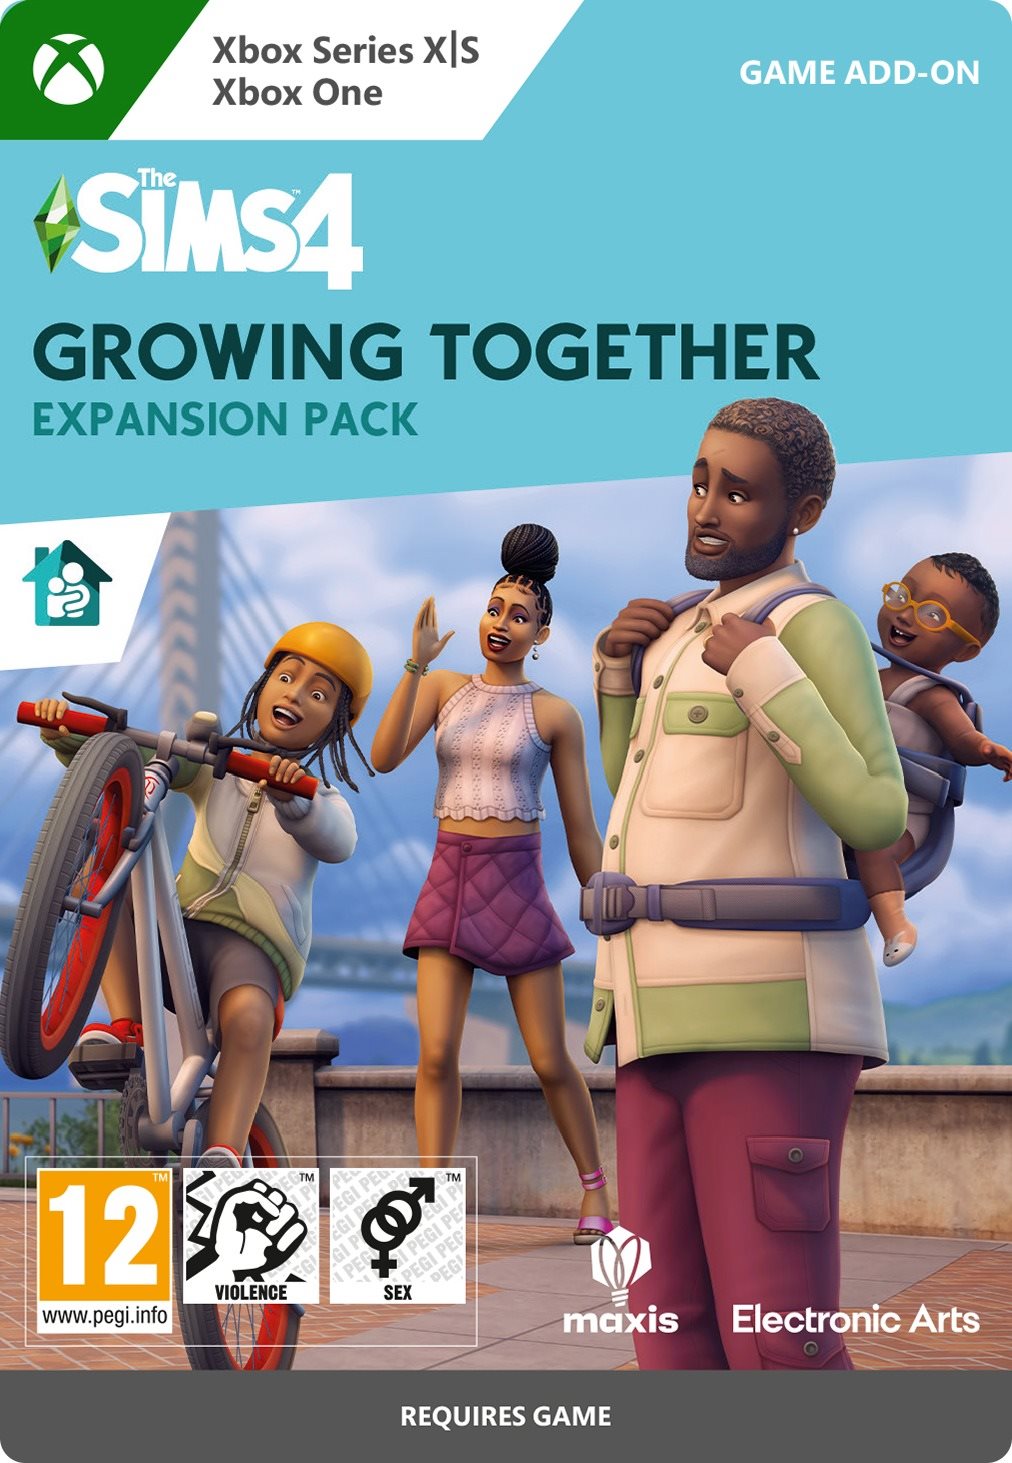 The Sim 4: Growing Together Expansion Pack - Xbox Digital